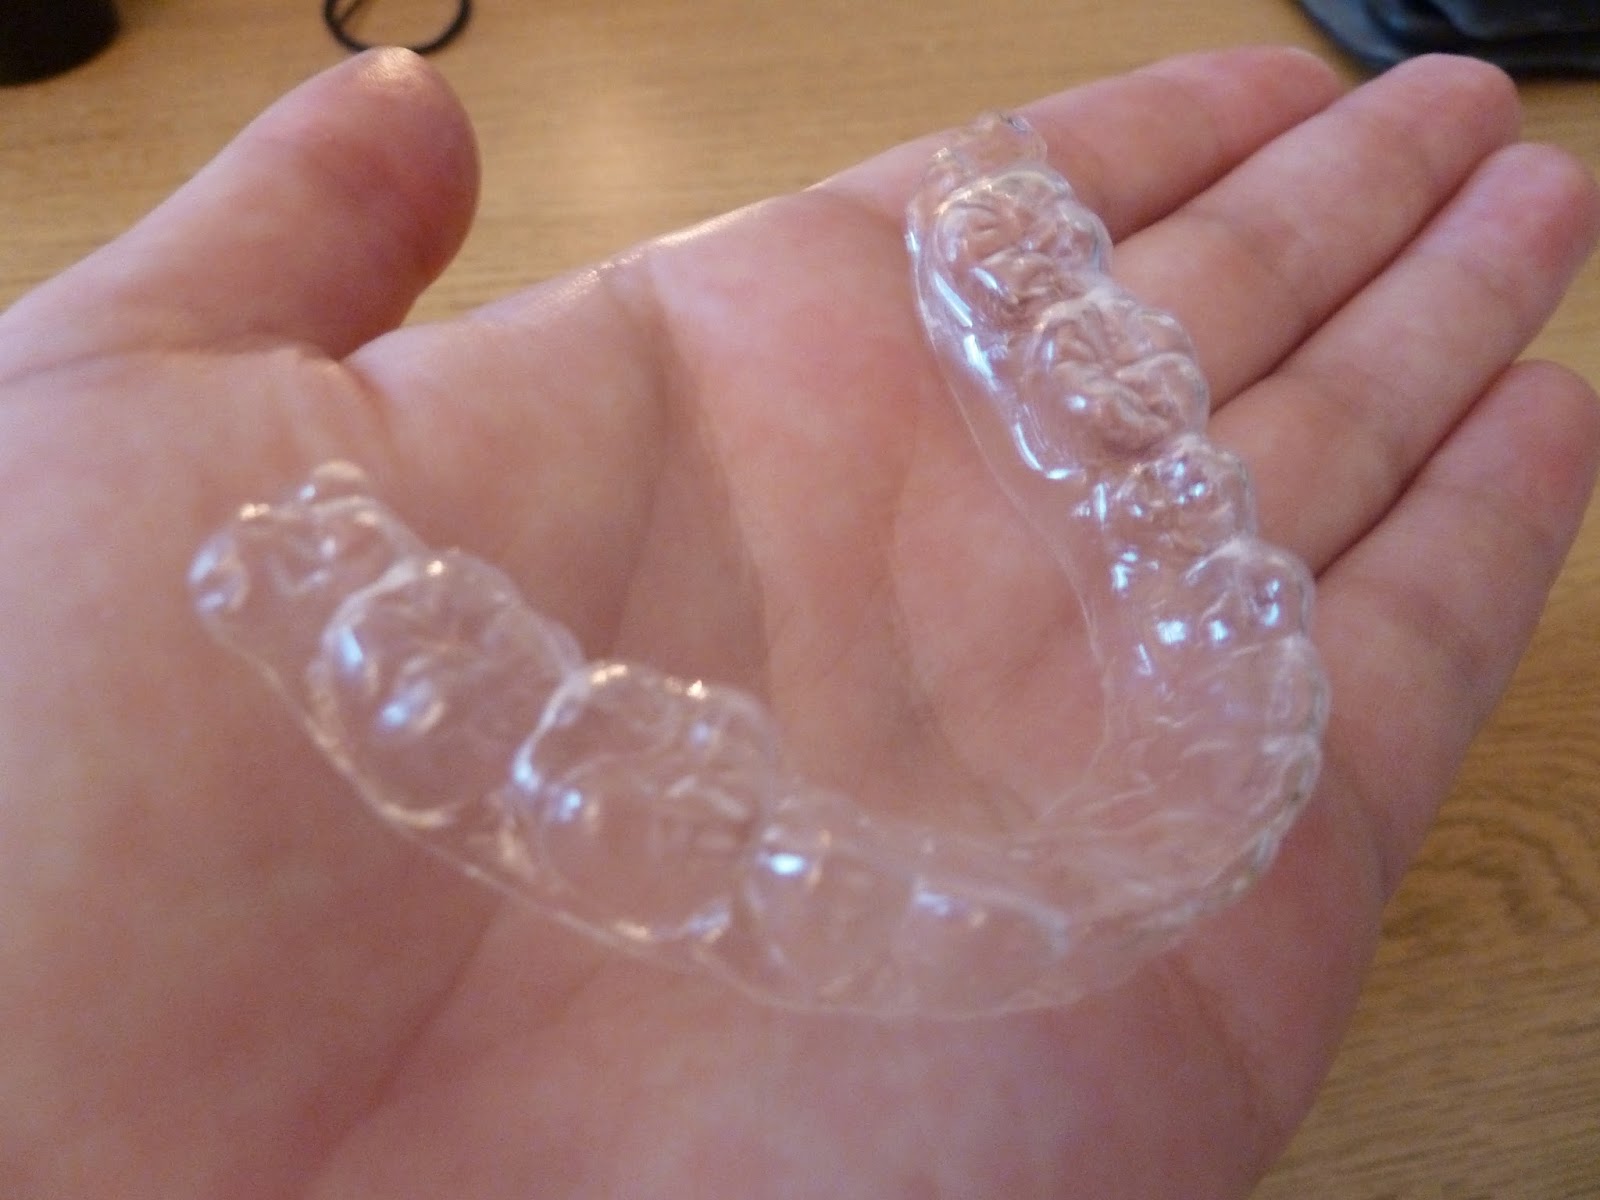 A photo of my removable lower retainer